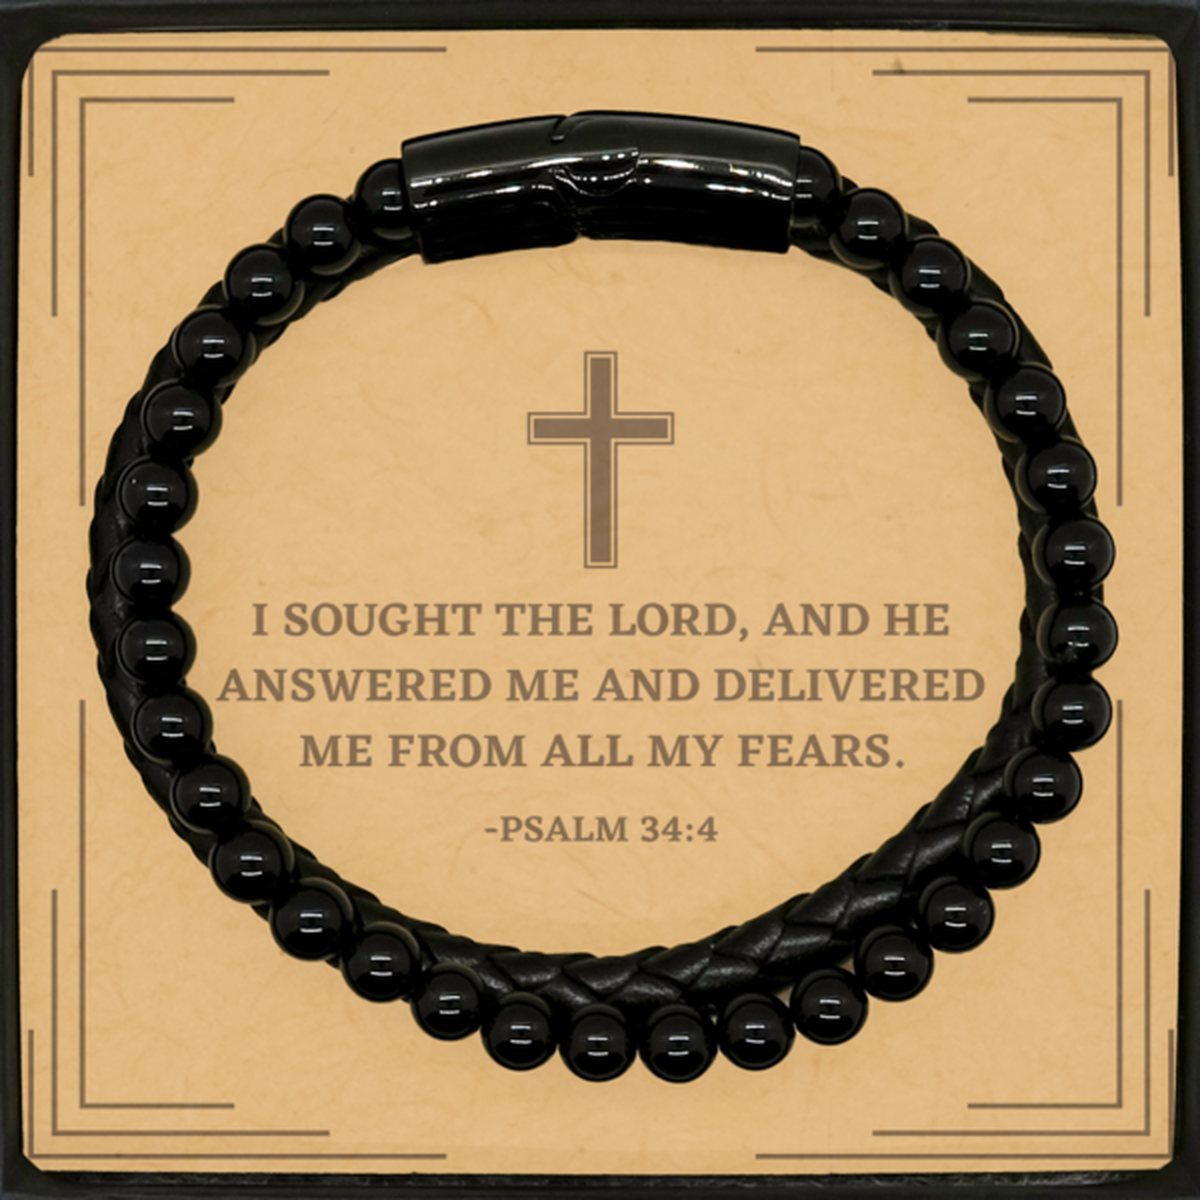 Baptism Gifts For Teenage Boys Girls, Christian Bible Verse Stone Leather Bracelet, I sought the Lord, Confirmation Gifts, Bible Verse Card for Son, Godson, Grandson